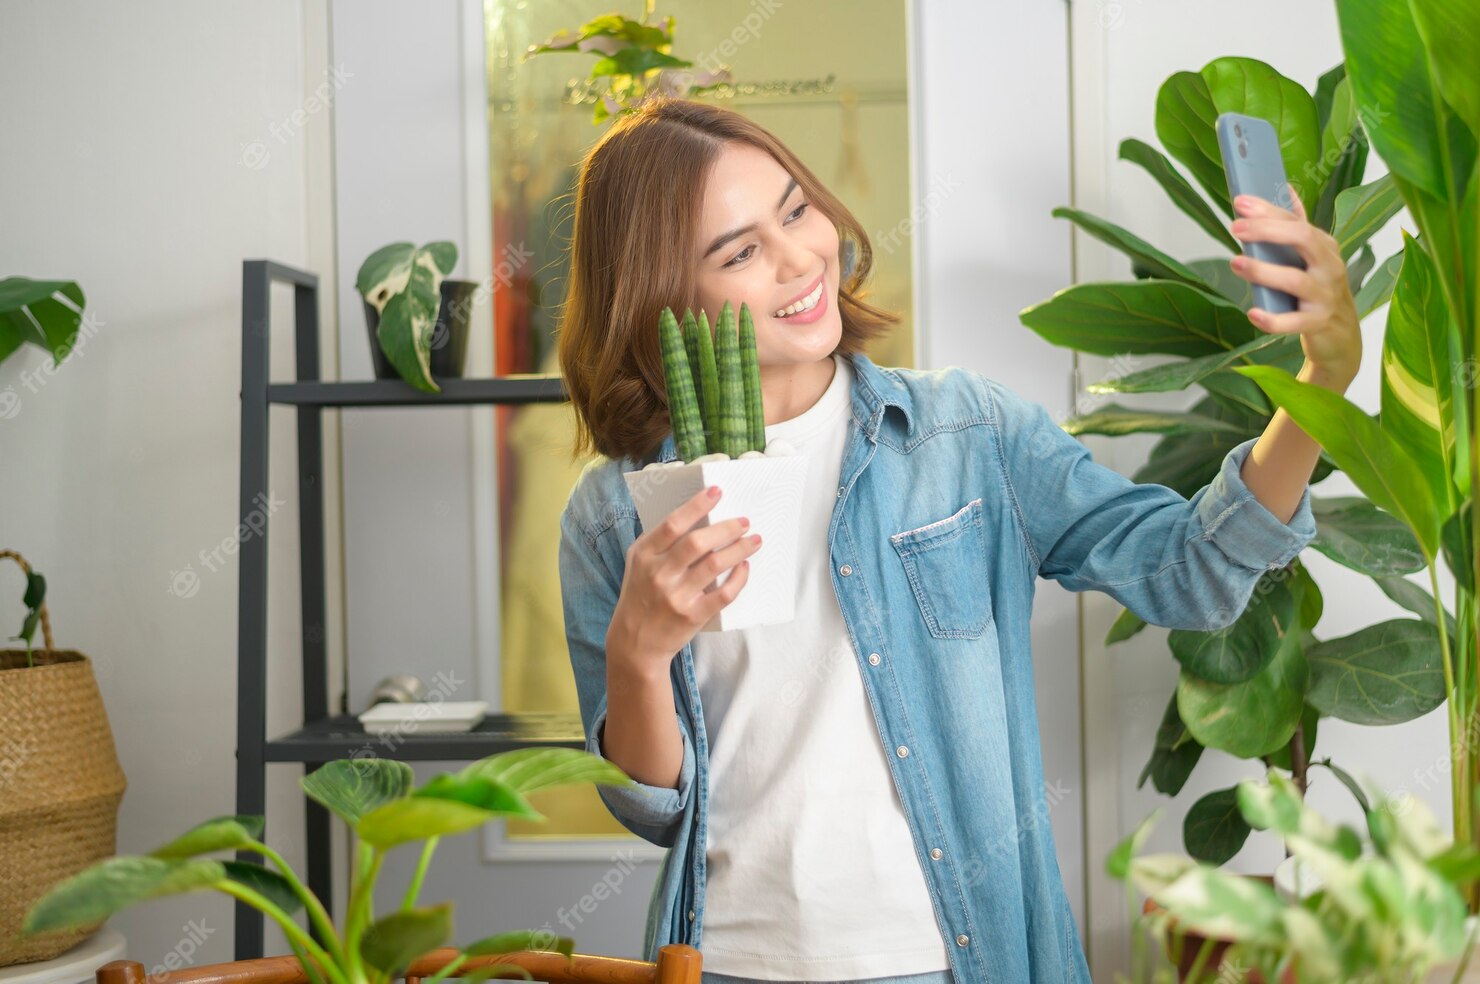 woman taking care of indoor plant